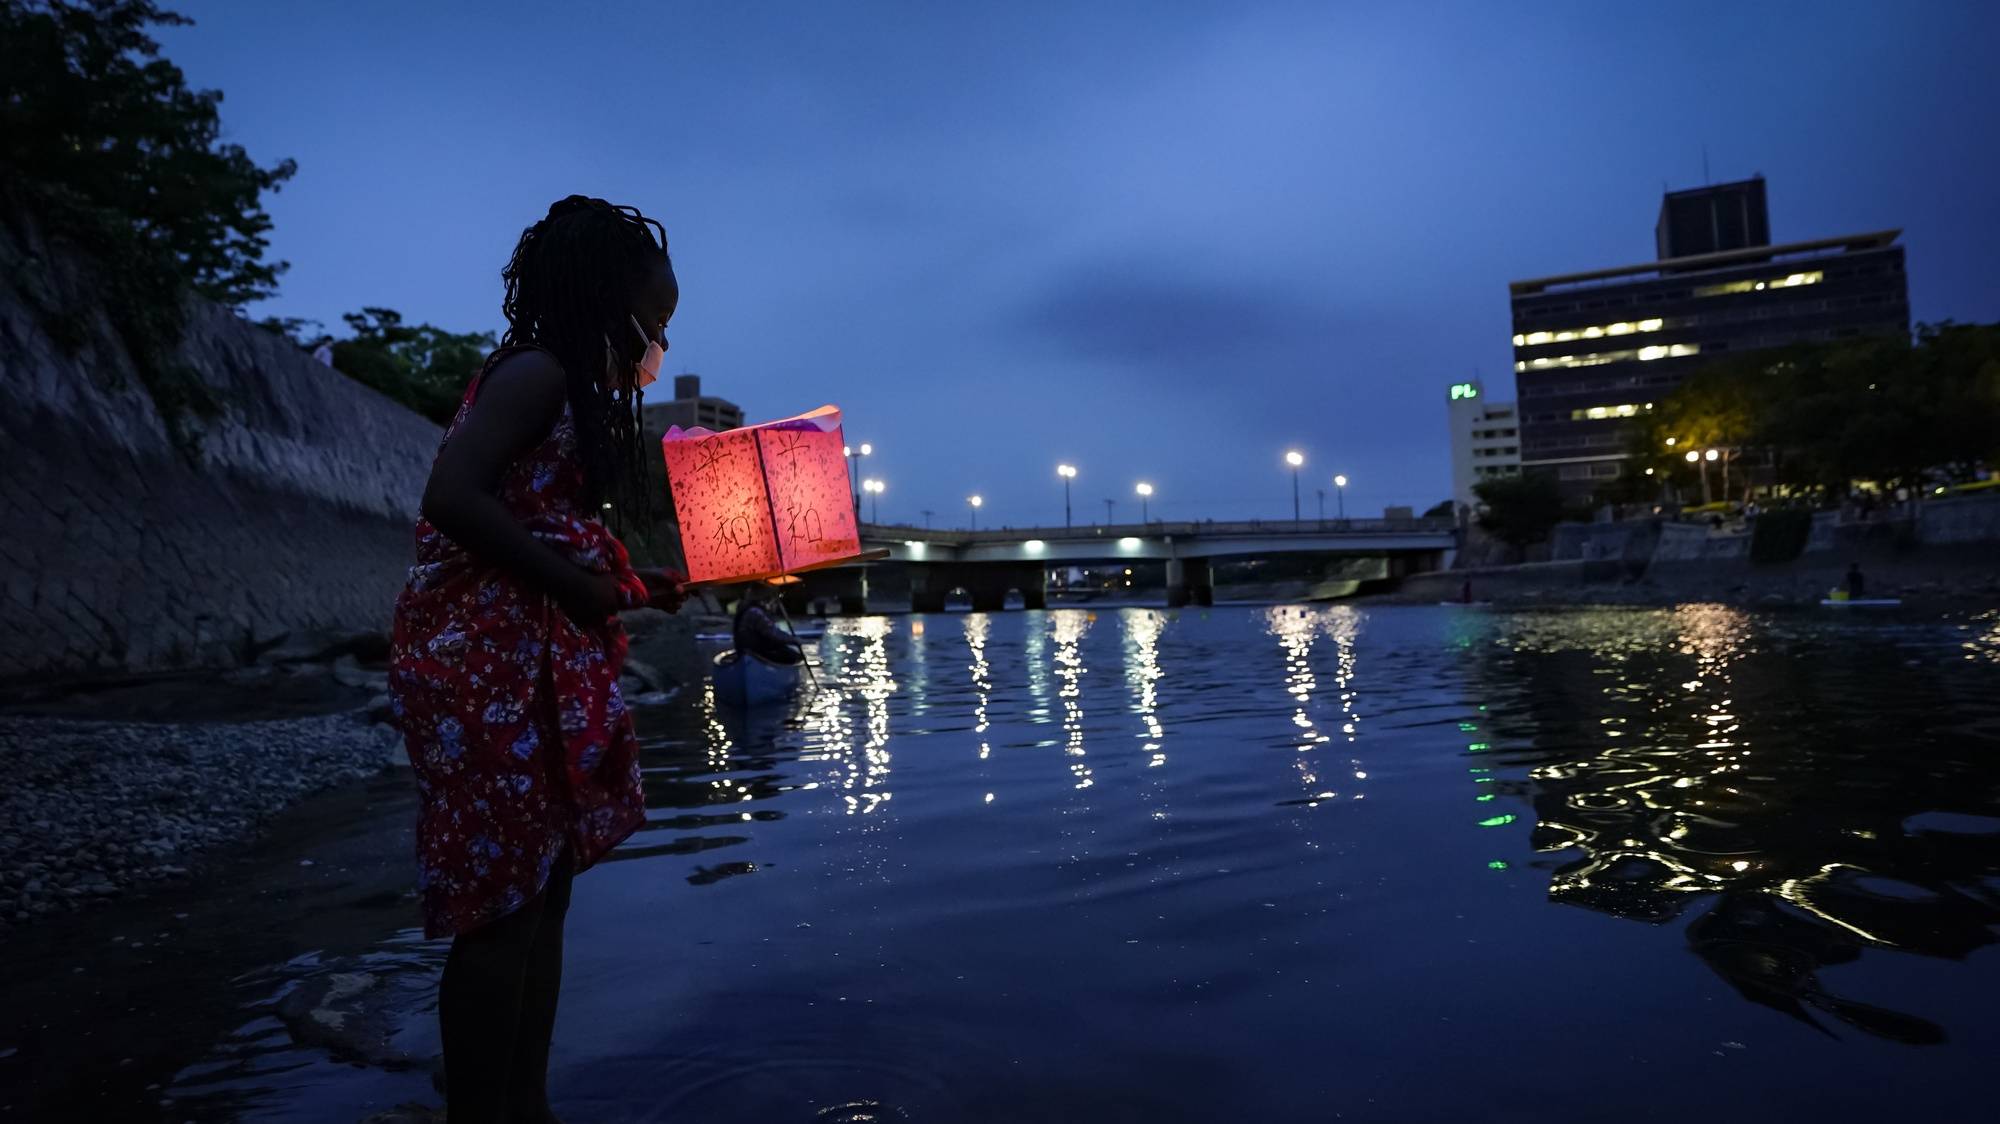 epa08587259 Seven-year-old Kenyan girl Joyce Makokha stands in the water as she placs a lantern on the water of Motoyasu River near the Peace Memorial Park in Hiroshima, western Japan, 06 August 2020. Only a handful of representatives released lanterns on the water after the annual floating lantern event which attracts thousands of people has been canceled this year to avoid the spreading of the coronavirus disease (COVID-19) pandemic. On 06 August 2020 Japan marks the 75th anniversary of the bombing of Hiroshima. In 1945 the United States dropped two nuclear bombs over the cities of Hiroshima and Nagasaki on 06 and 09 August respectively, killing more than 200,000 people. This year&#039;s commemoration events were either canceled or scaled down amid the ongoing coronavirus pandemic.  EPA/DAI KUROKAWA